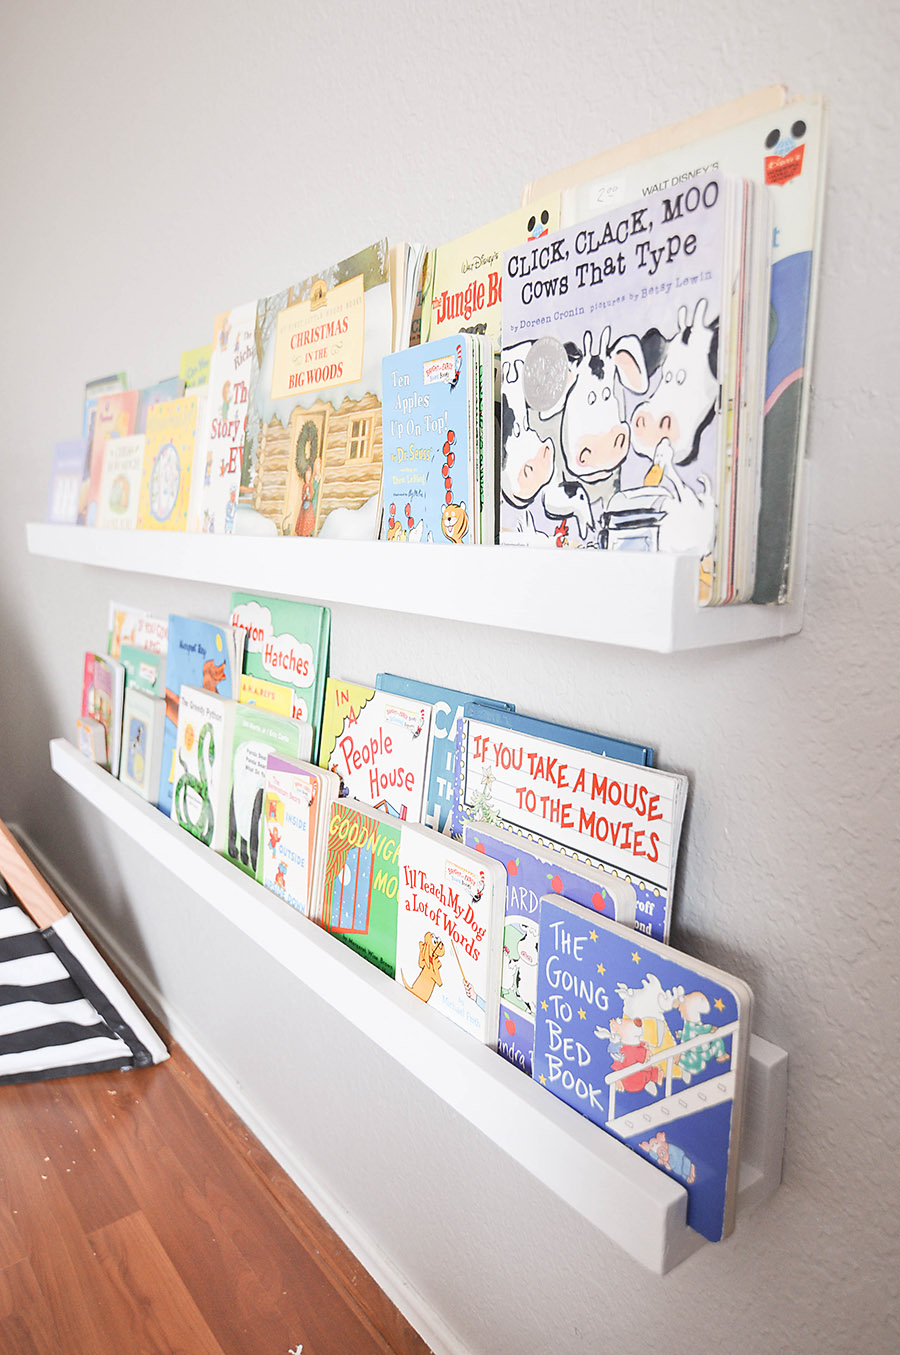 Diy Wall Mounted Kid S Bookshelves Our Handcrafted Life